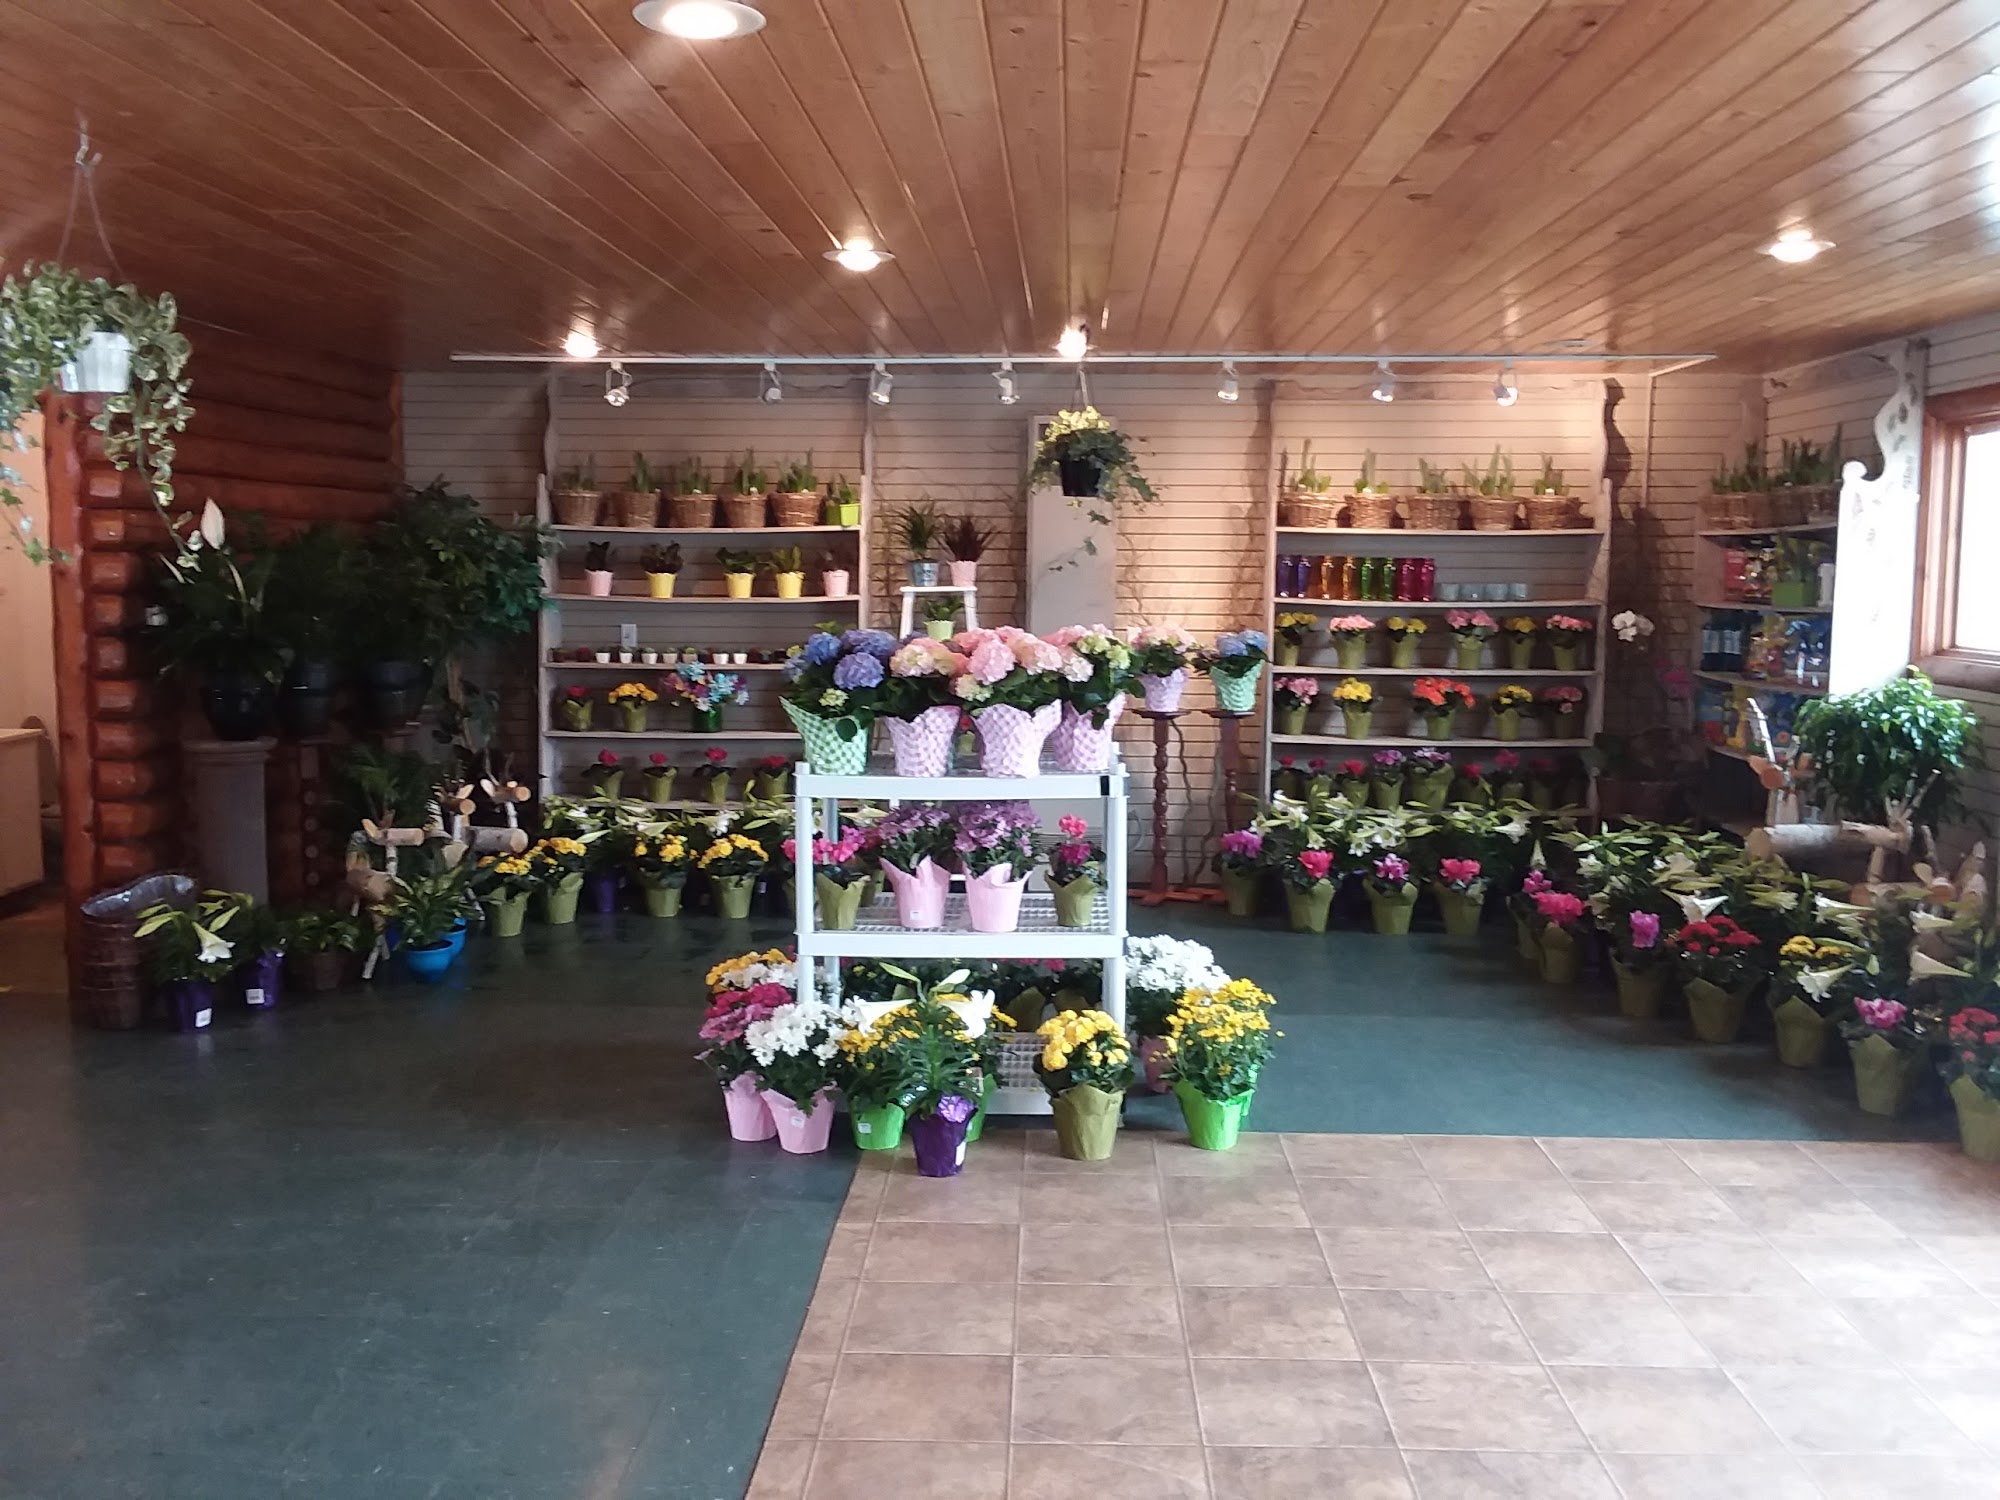 Brittany's Floral and Greenhouse 6036 E Ottertail Rd NW, Walker Minnesota 56484